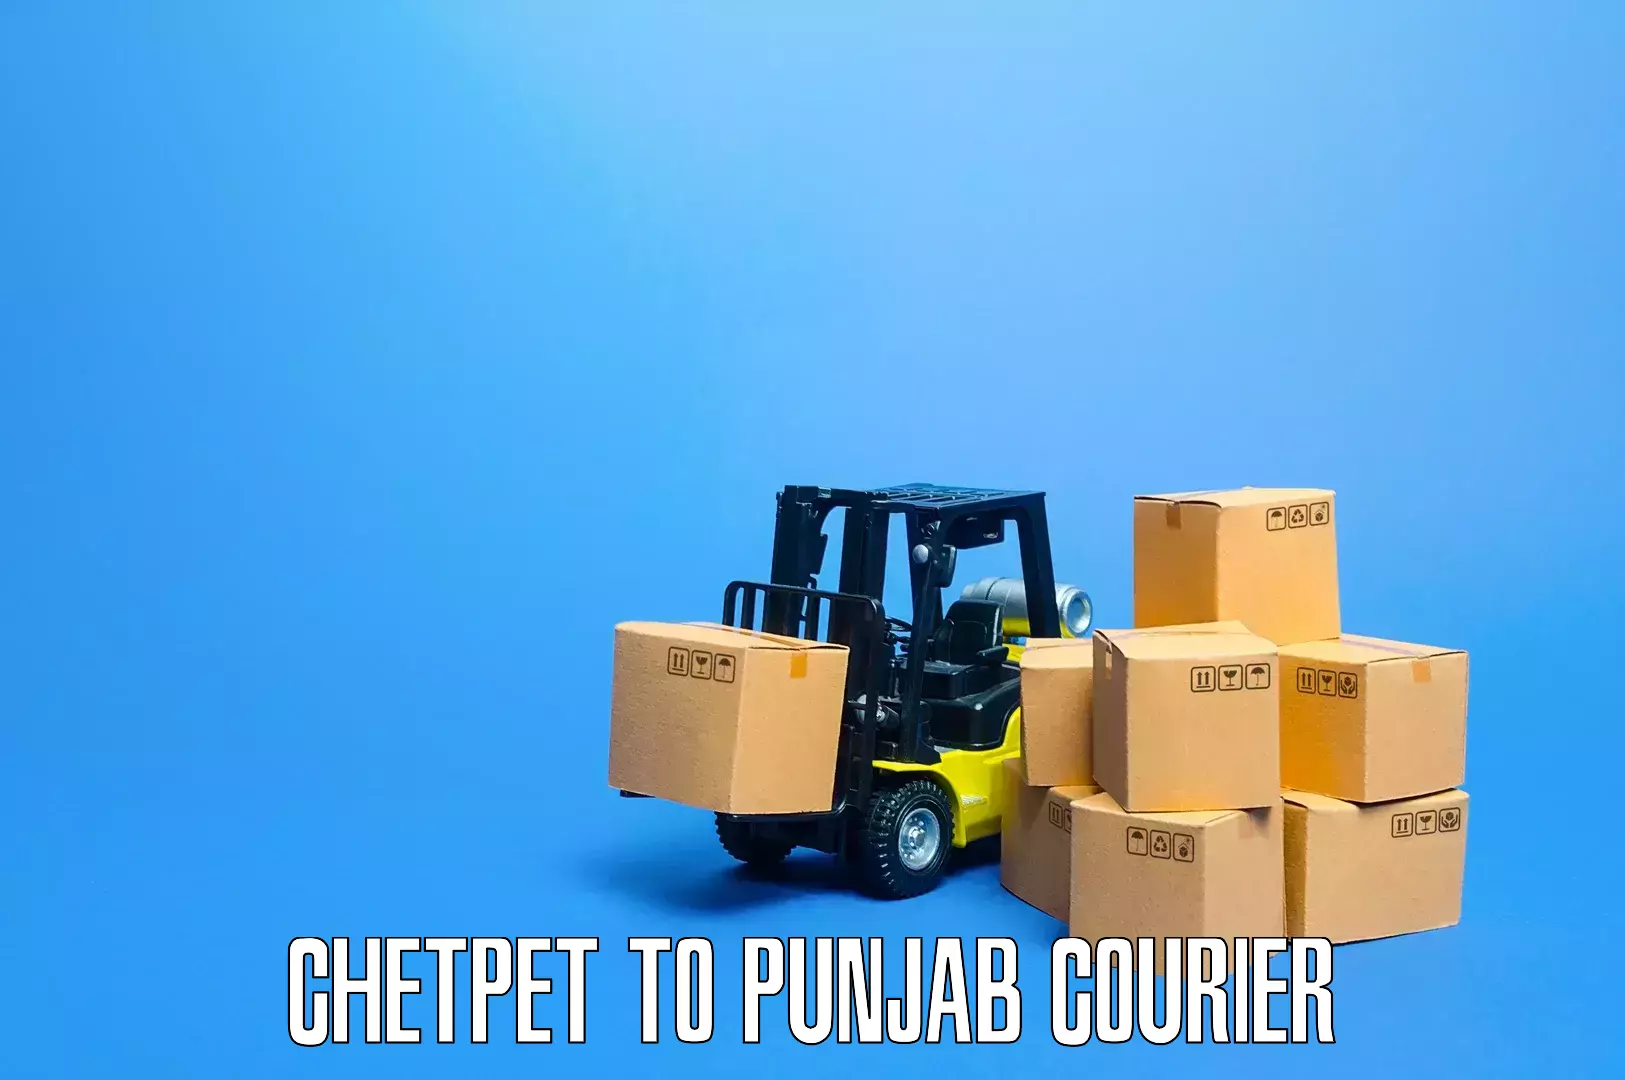 Specialized home movers Chetpet to Punjab